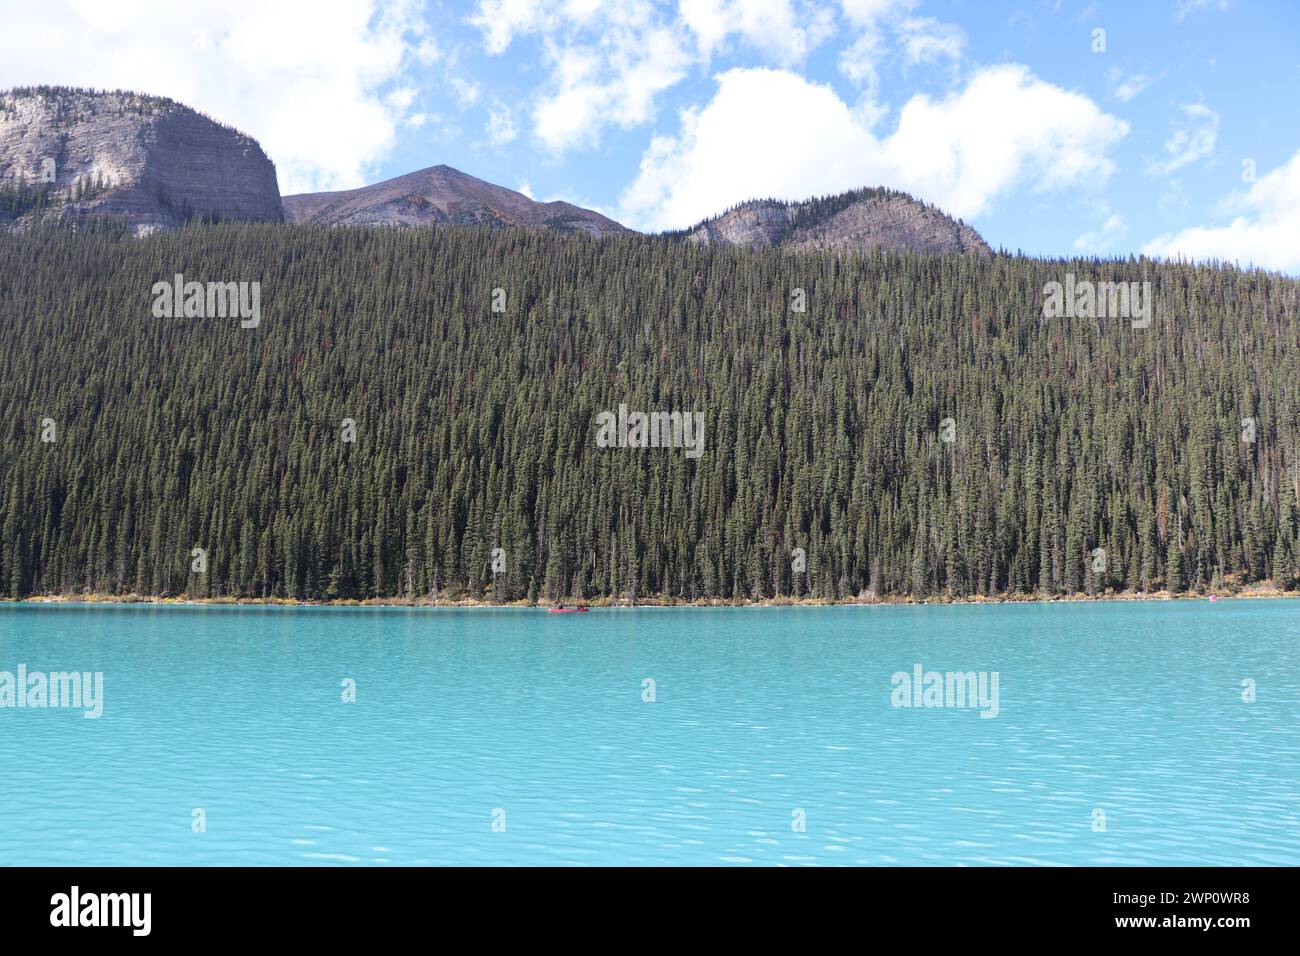 A clean and clear picture of the evergreen forest trees with aqua blue water and mountains, clouds and blue sky in the background Stock Photo